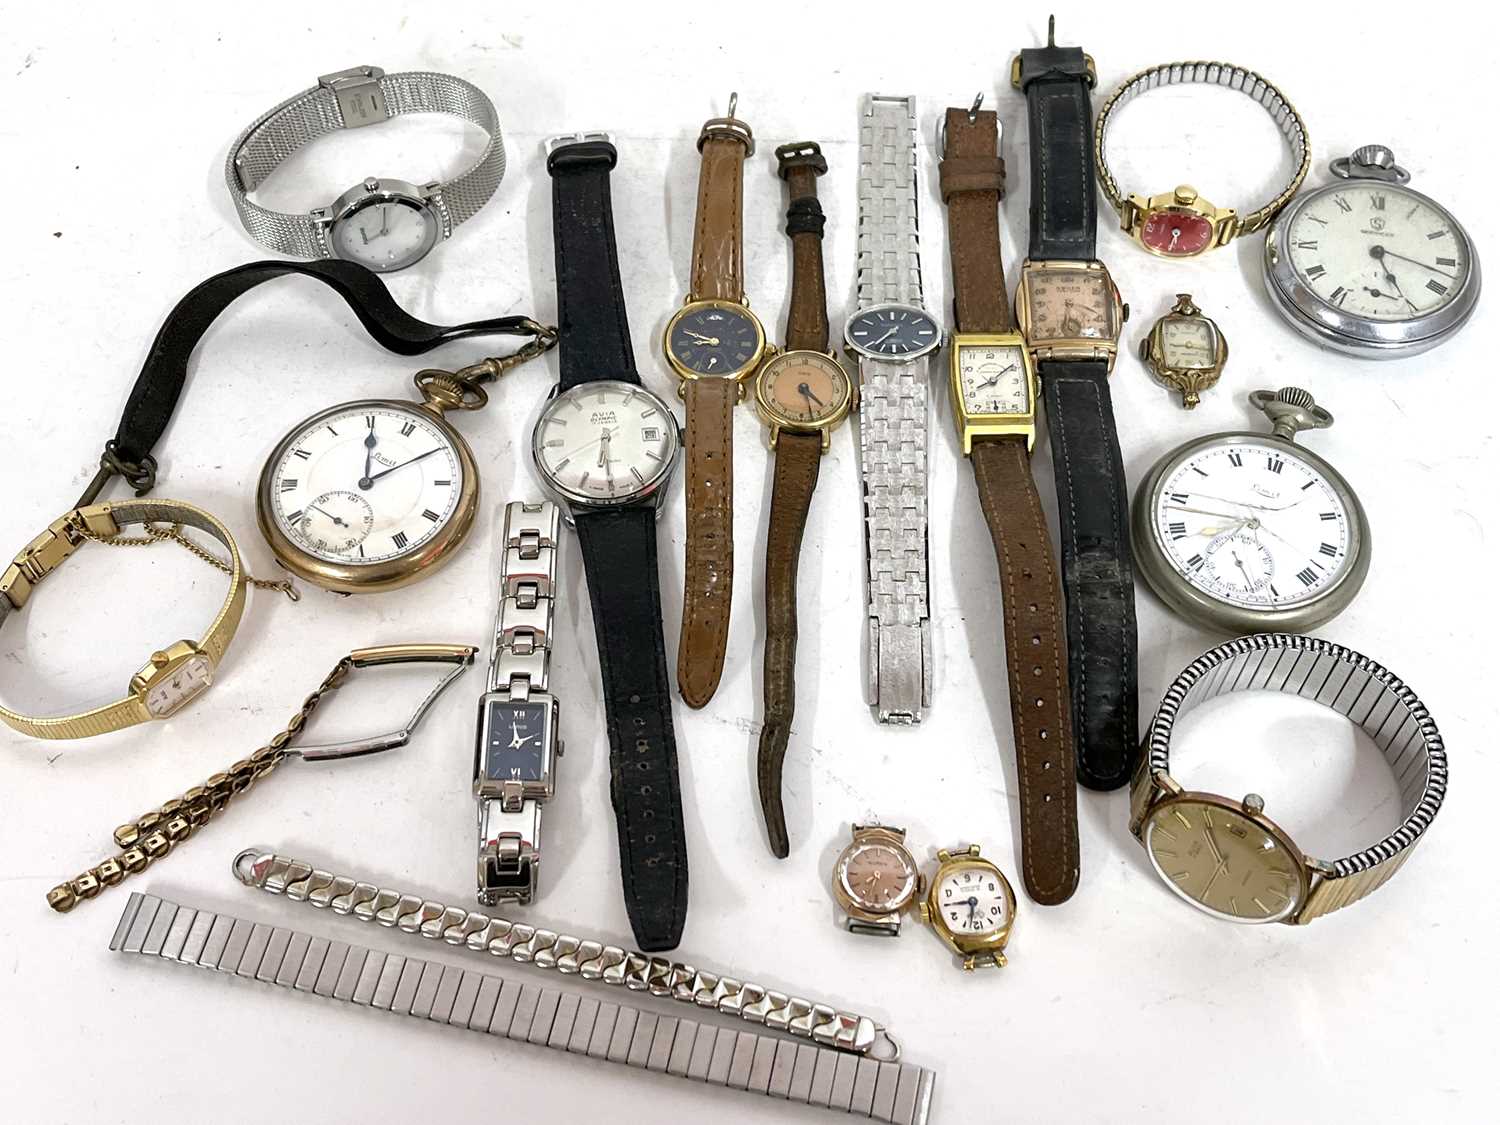 Mixed lot of various gents and ladies wristwatches and two pocket watches, makers of the watches